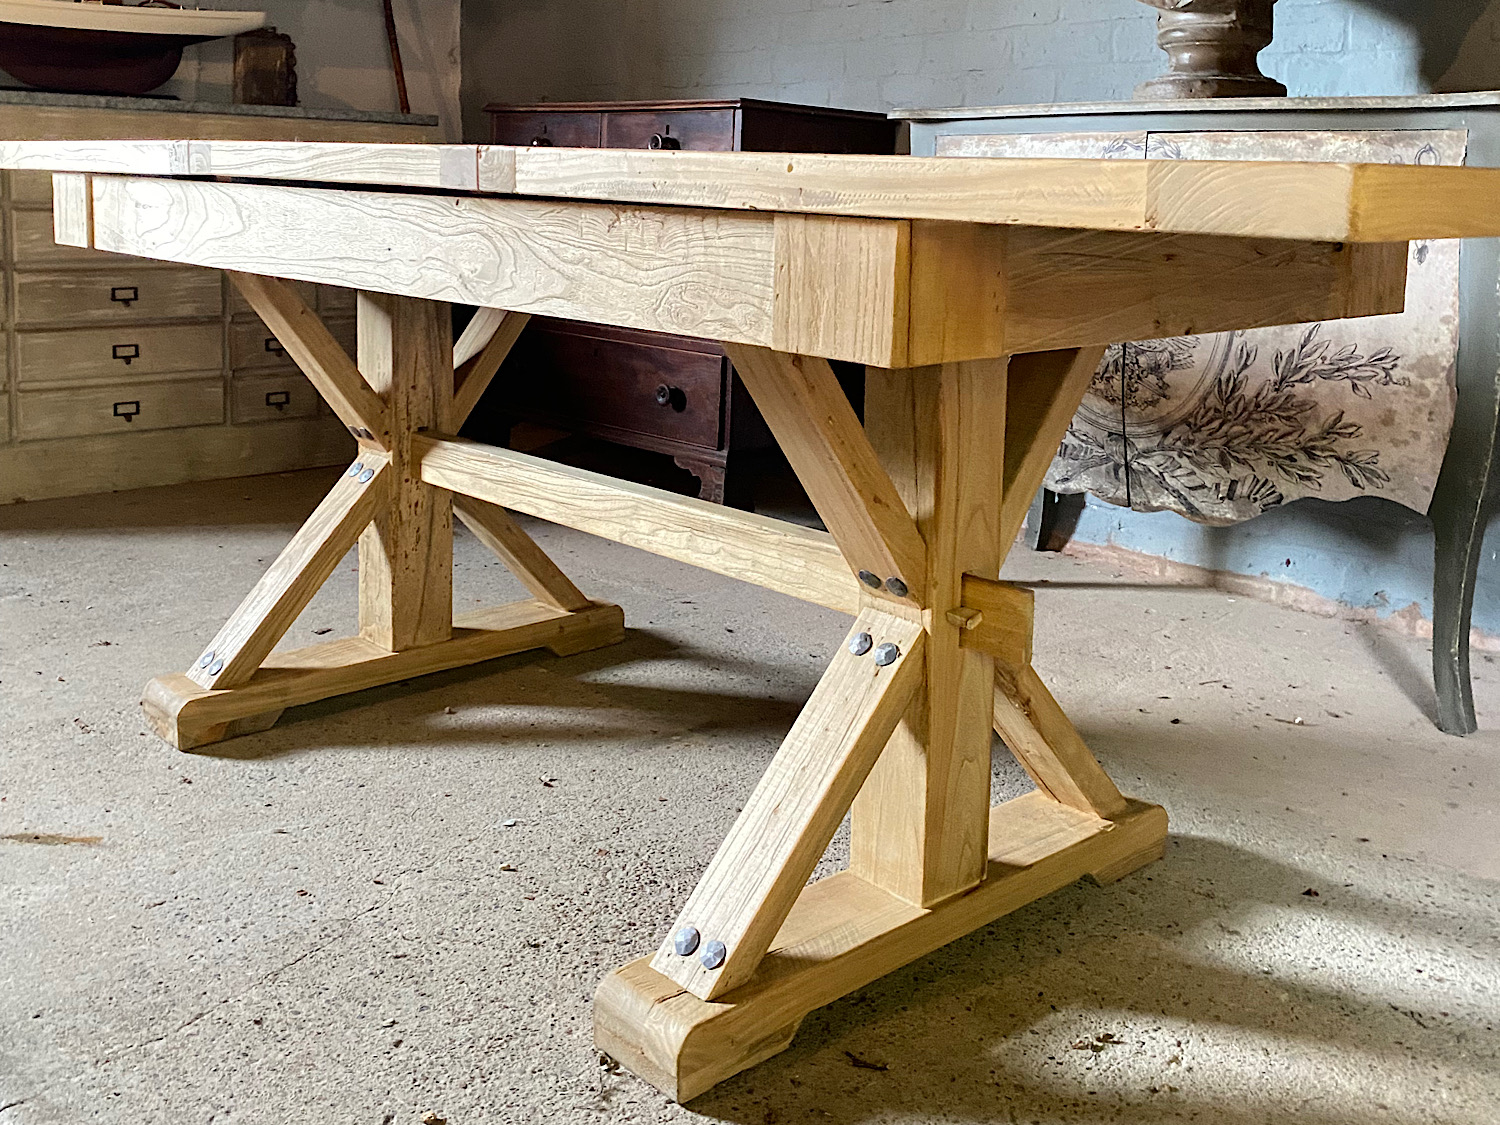 Extending Rustic Reclaimed Elm Dining Table